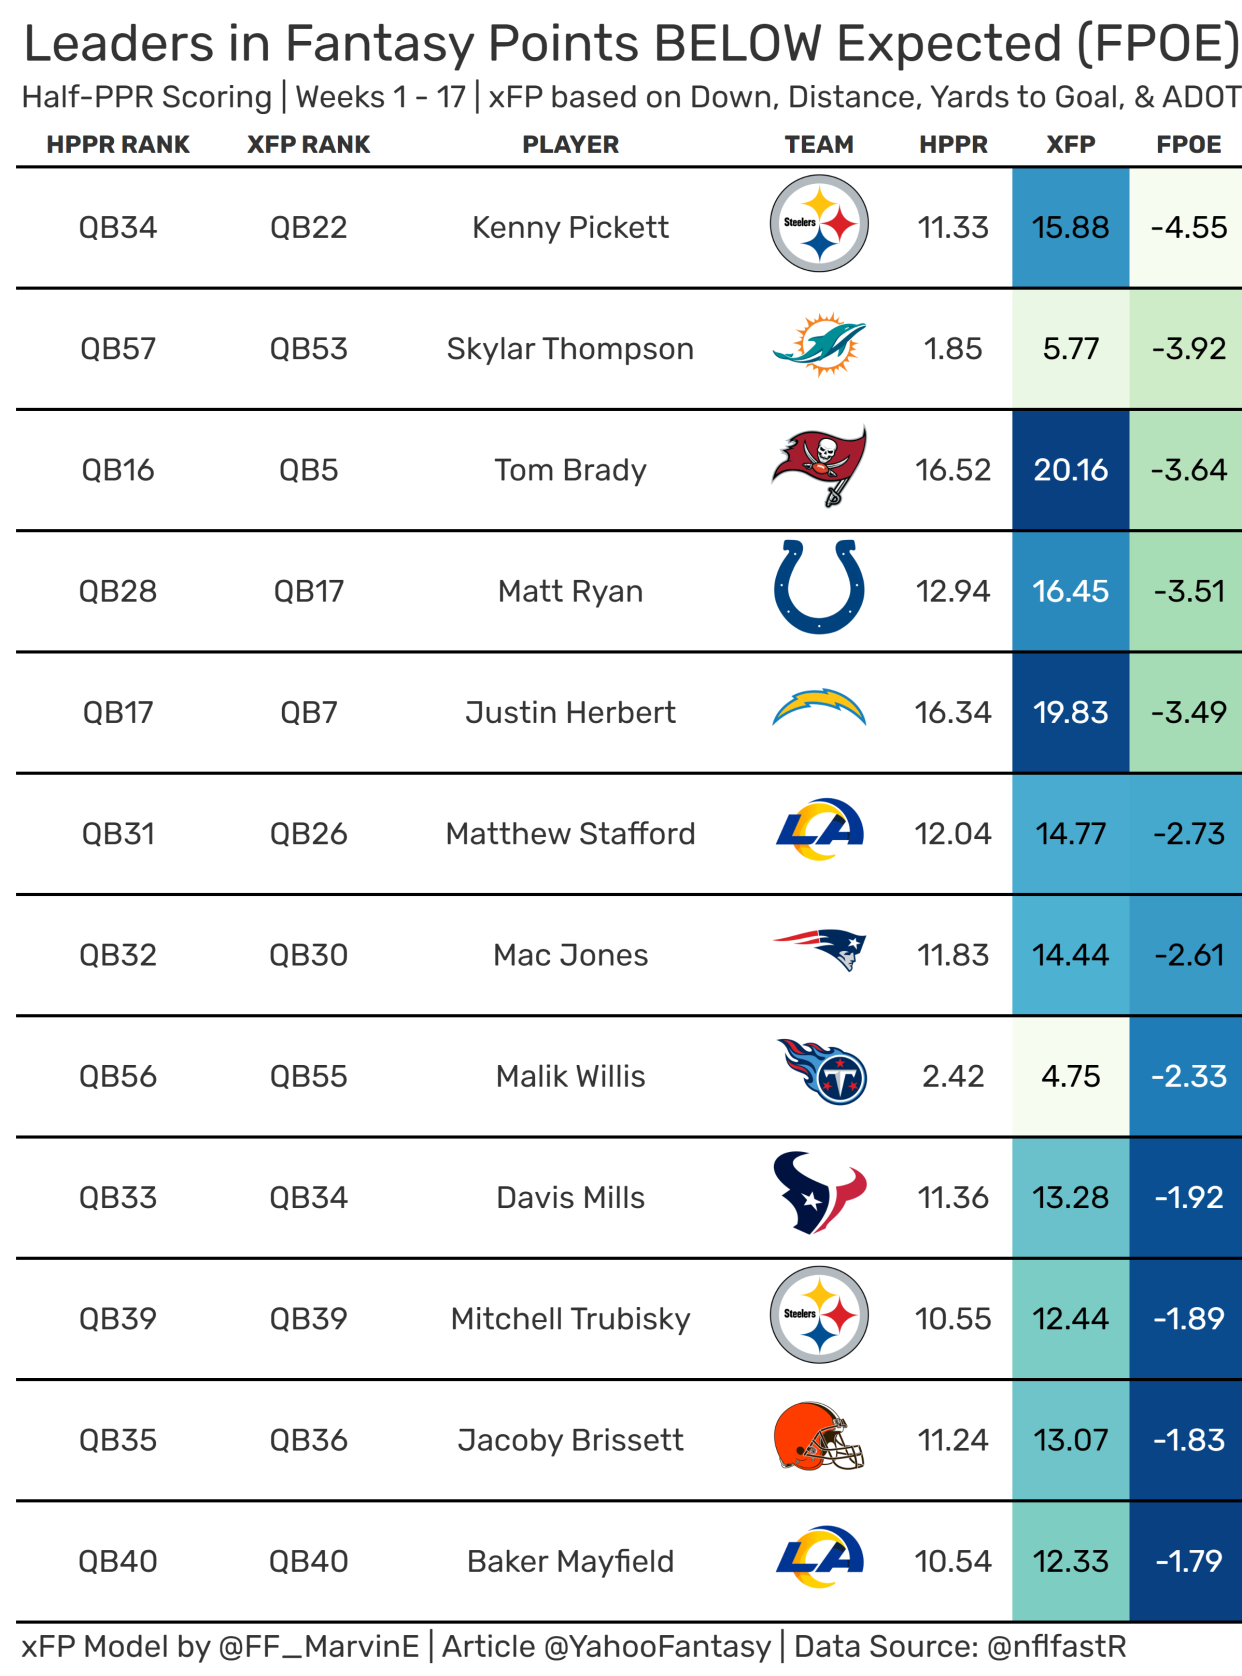 Quarterback leaders in fantasy points below expected. (Data courtesy of nflfastR)